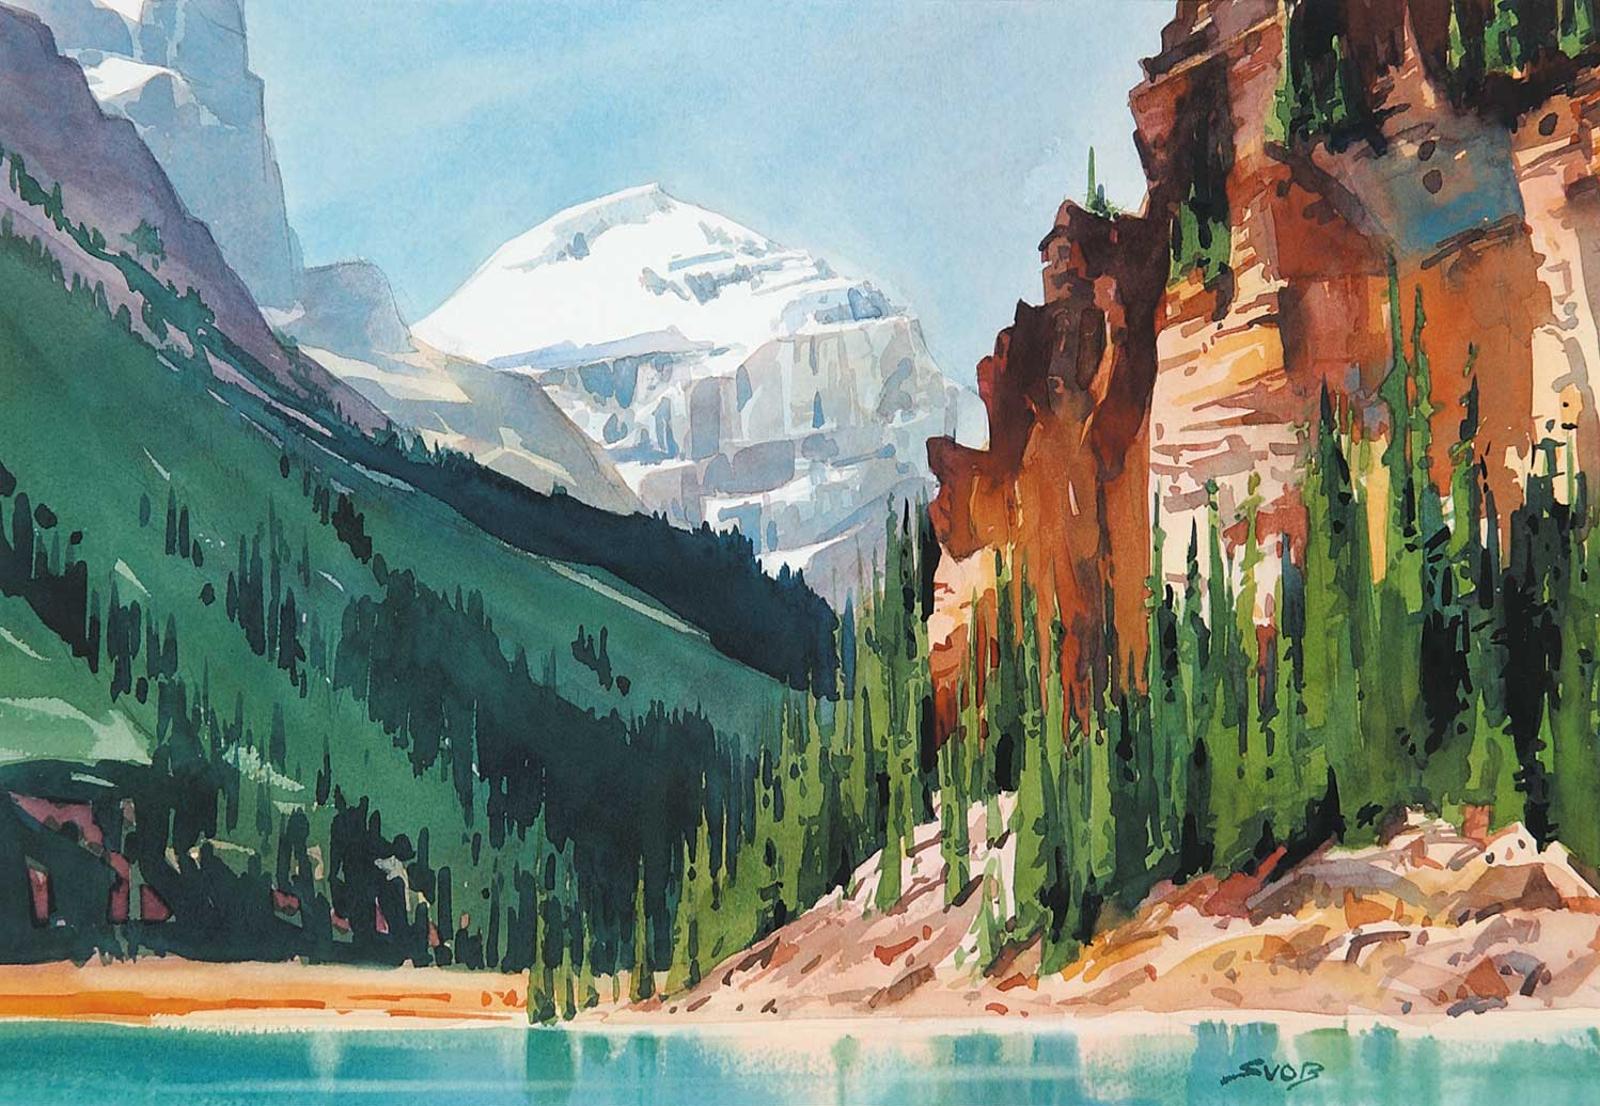 Mike [Charles] Svob (1945) - Lake Louise, West End